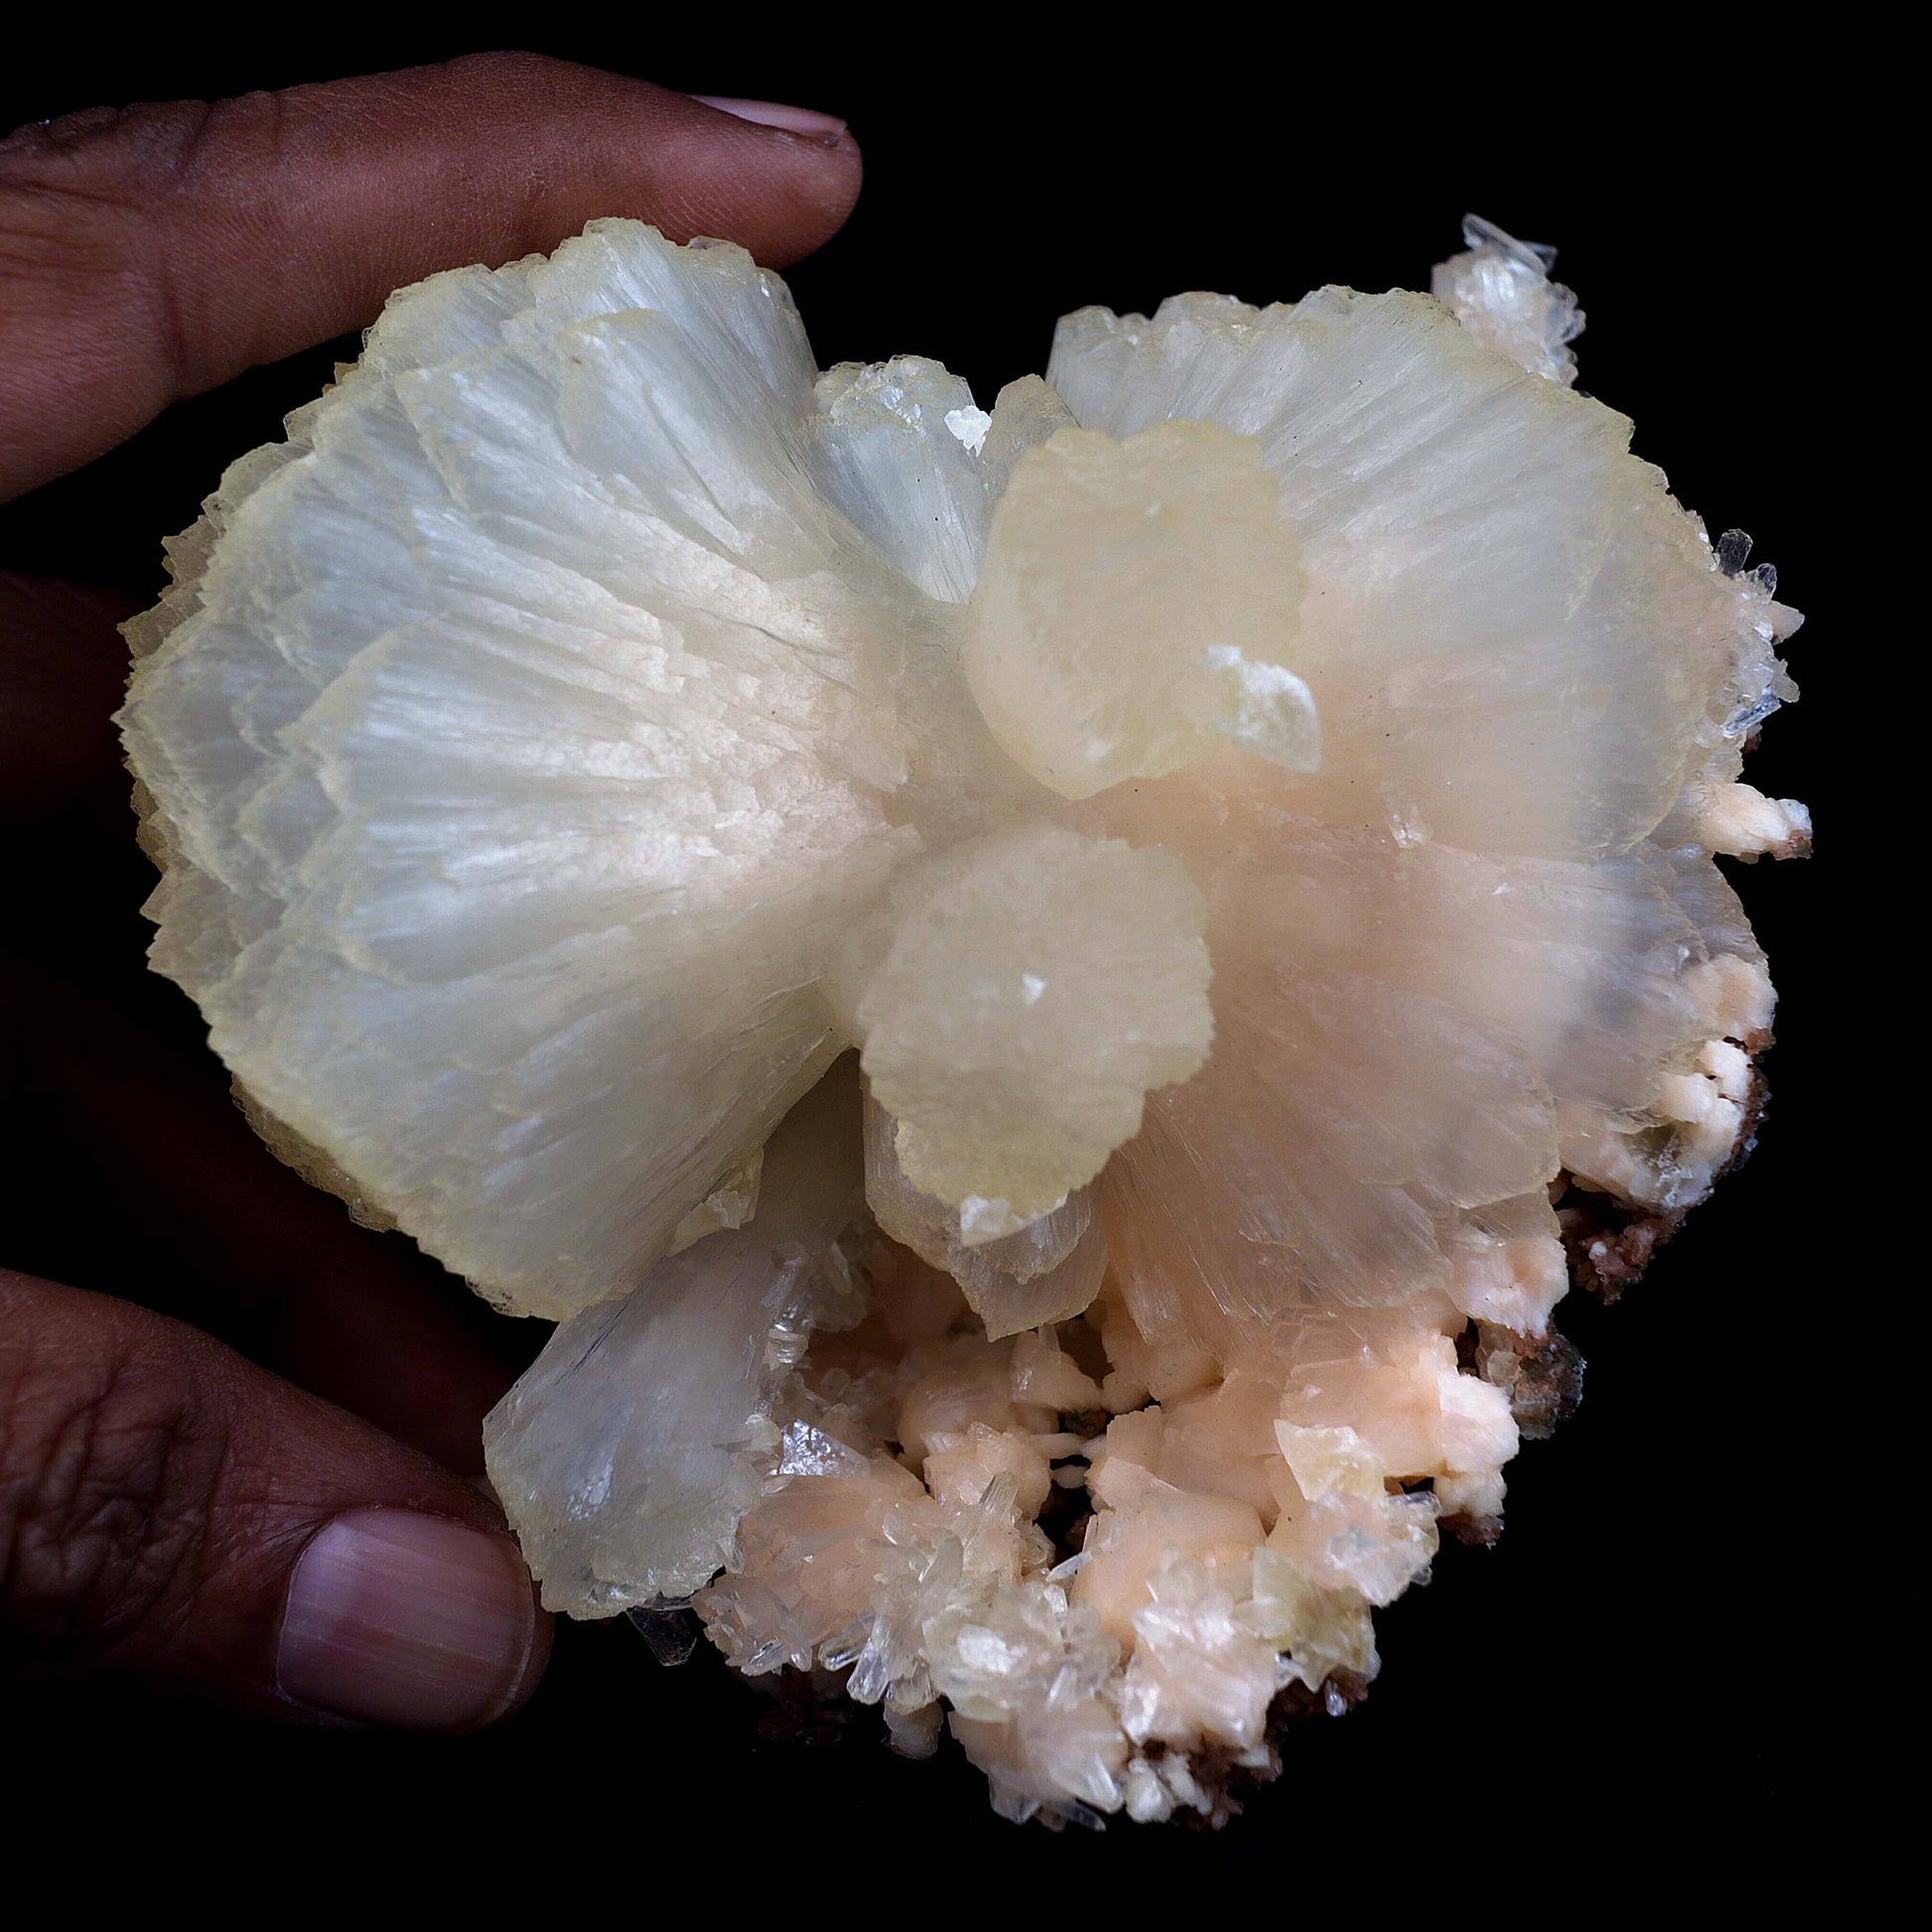 Stilbite Perfect Bow-tie on Heulandite Natural Mineral Specimen # B 4…  https://www.superbminerals.us/products/stilbite-perfect-bow-tie-on-heulandite-natural-mineral-specimen-b-4515  Features:From Jalgaon, a huge ivory stilbite bowtie of exceptional quality. Set atop a thin crust, bordered by glassy, colourless Heulandite crystals, it is visually pleasing. Bowtie has a high sheen and is in excellent condition. In this area, it's quite rare to find a product of this size and quality. 